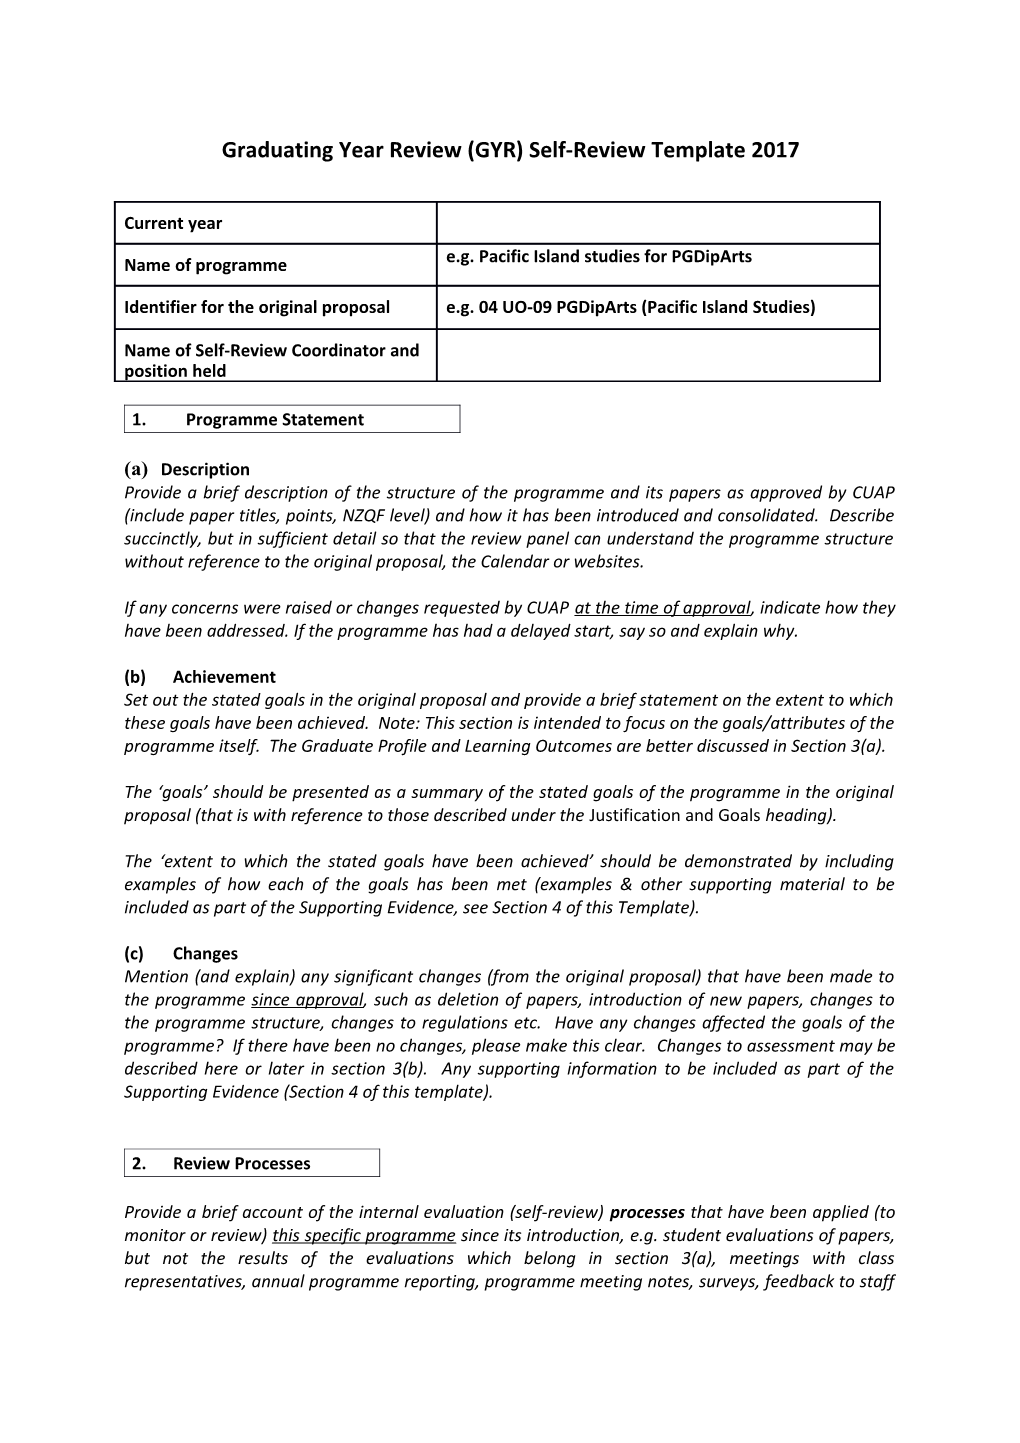 Graduating Year Review (GYR) Self-Review Template 2017